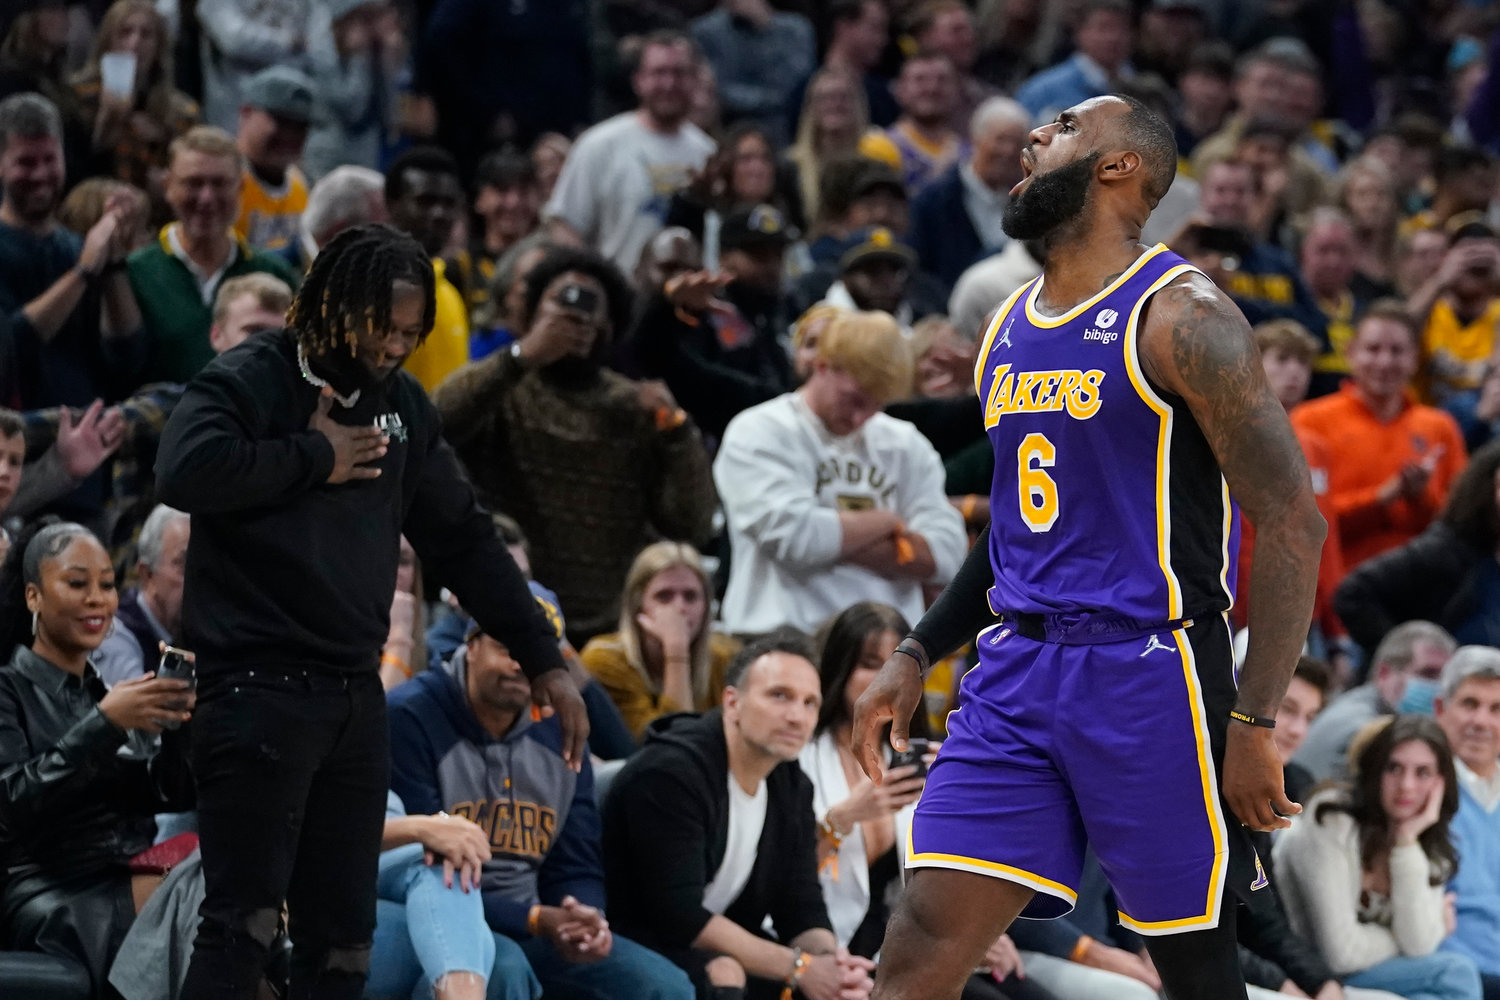 FINED — Los Angeles Lakers' LeBron James reacts after hitting a shot during overtime of in the team's NBA basketball game against the Indiana Pacers, Wednesday, Nov. 24, in Indianapolis. James has been fined $15,000 by the NBA for an obscene gesture.